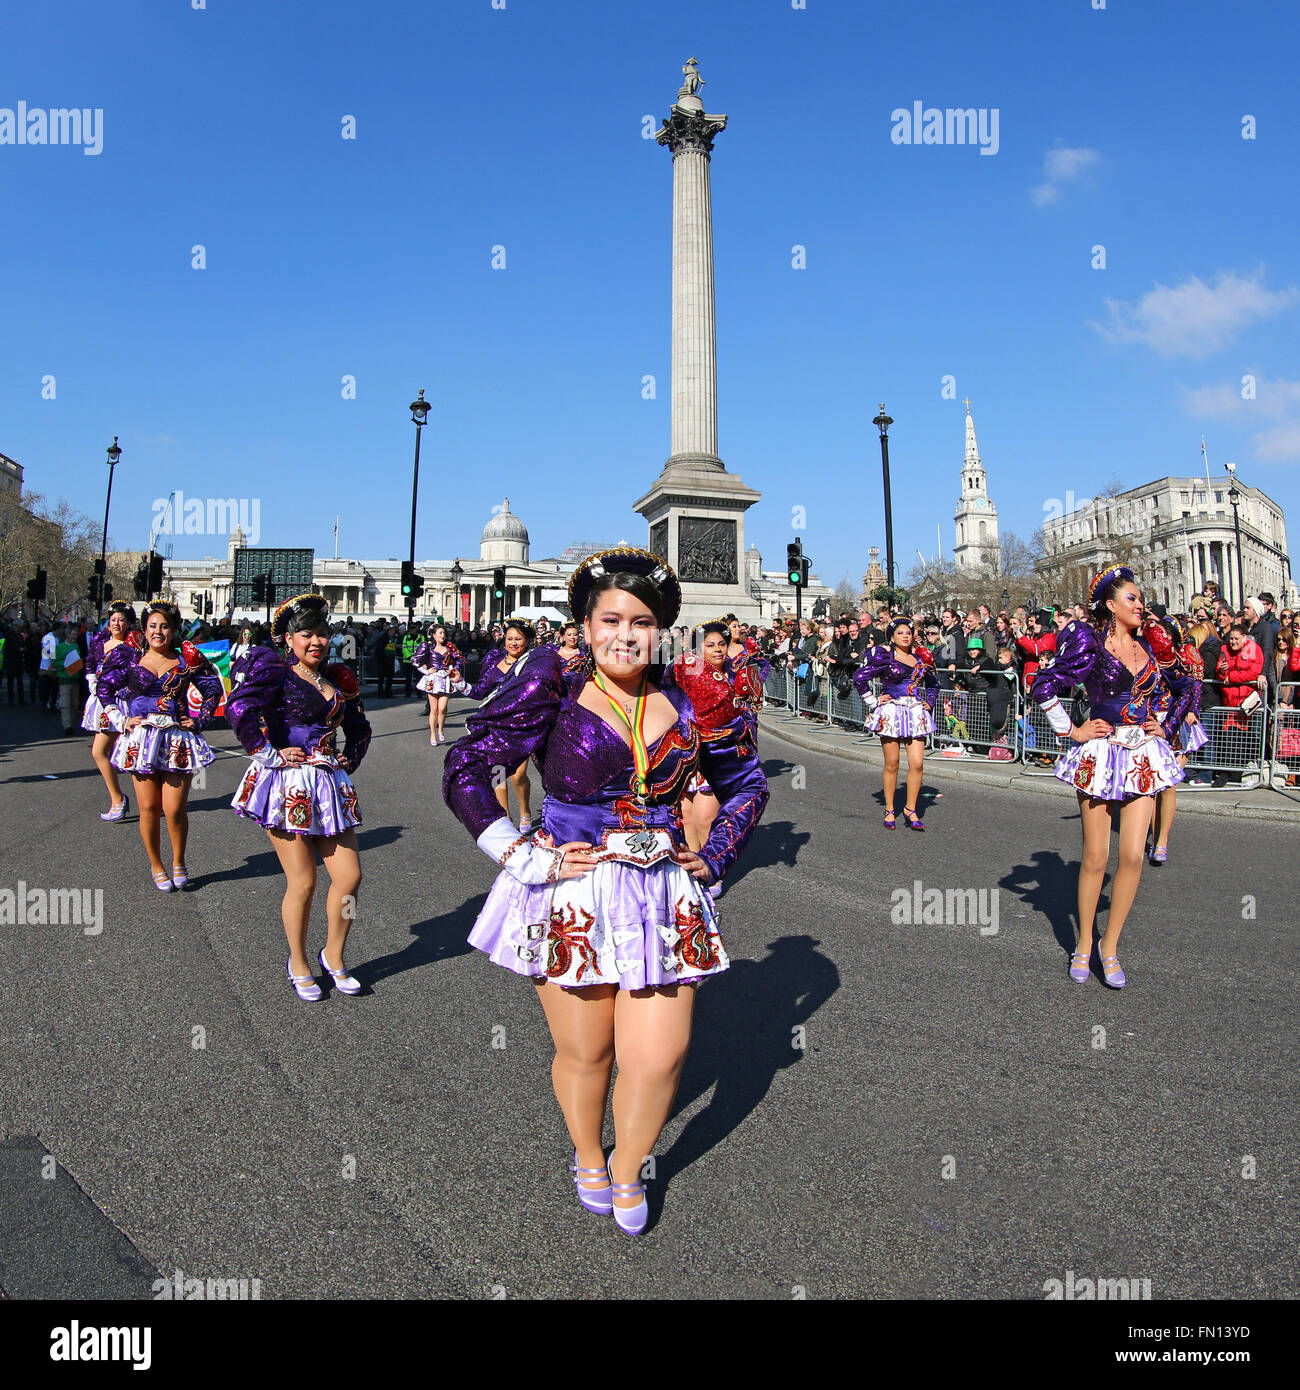 London, UK. 13th March 2016. Participants in the St Patrick's Day Parade 2016 at Trafalgar Square with Nelson's Column in London Credit:  Paul Brown/Alamy Live News Stock Photo